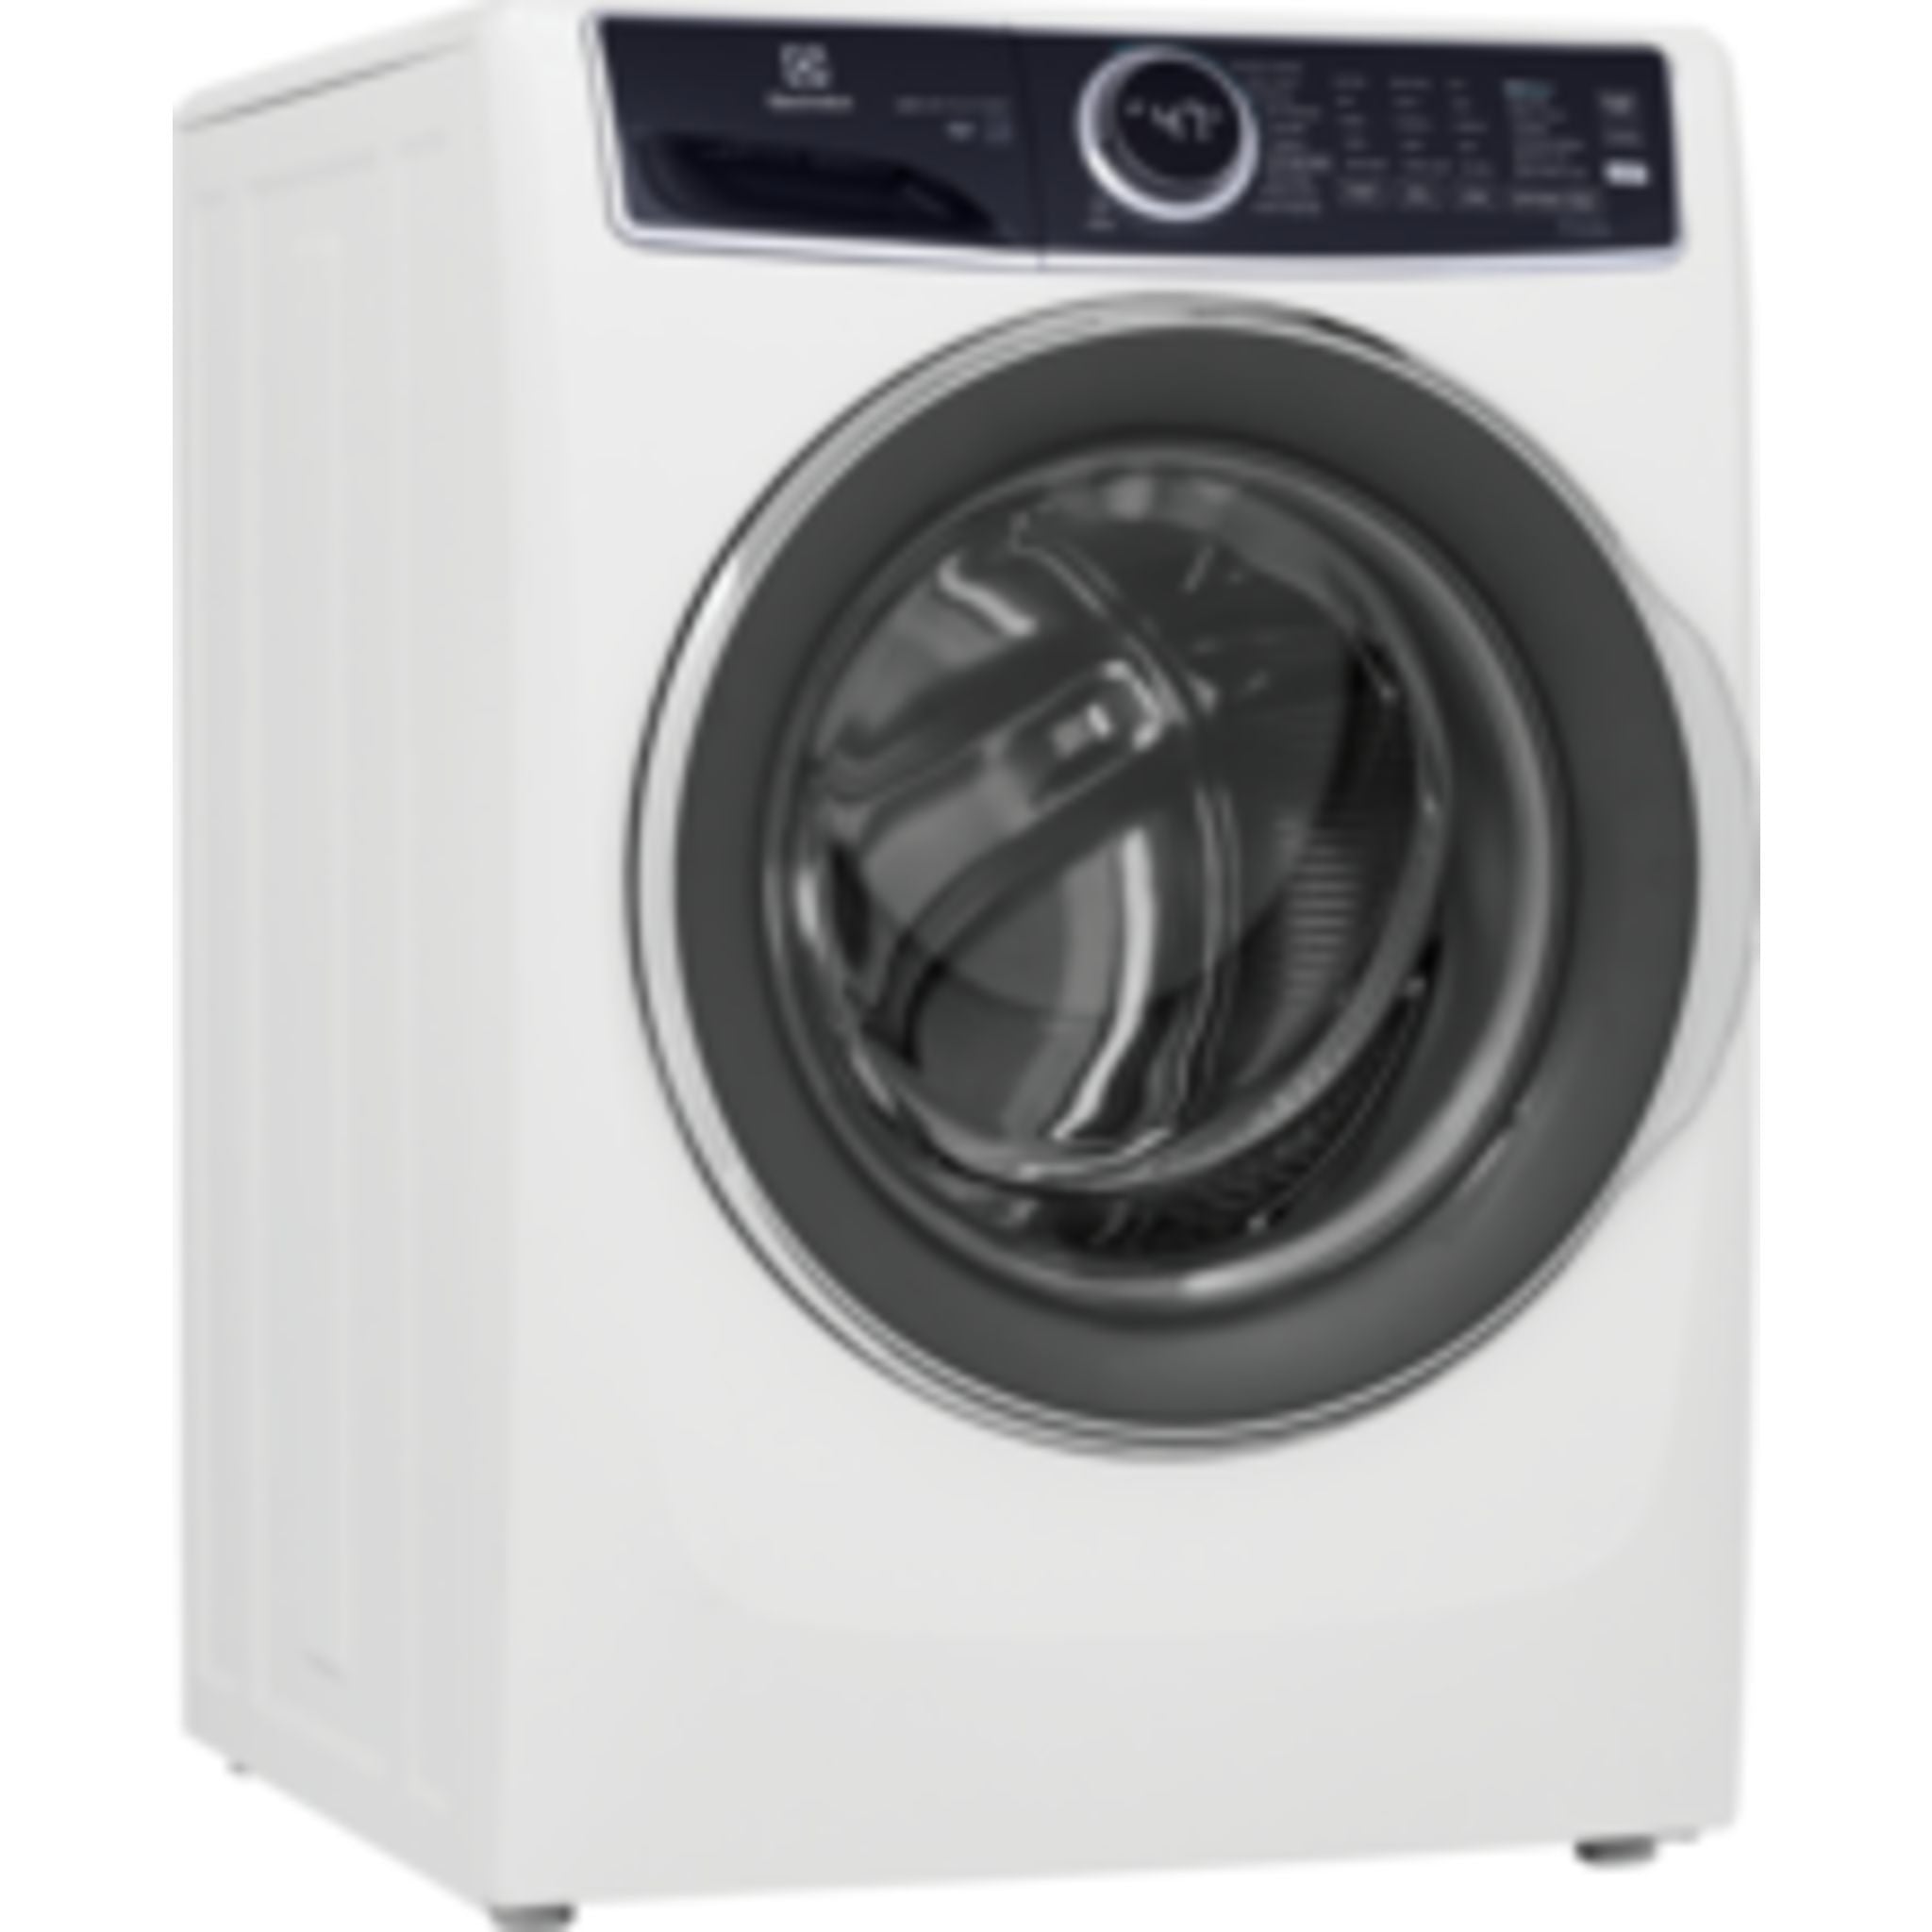 Electrolux Home Products, Electrolux Front Load Washer (ELFW7537AW) - White